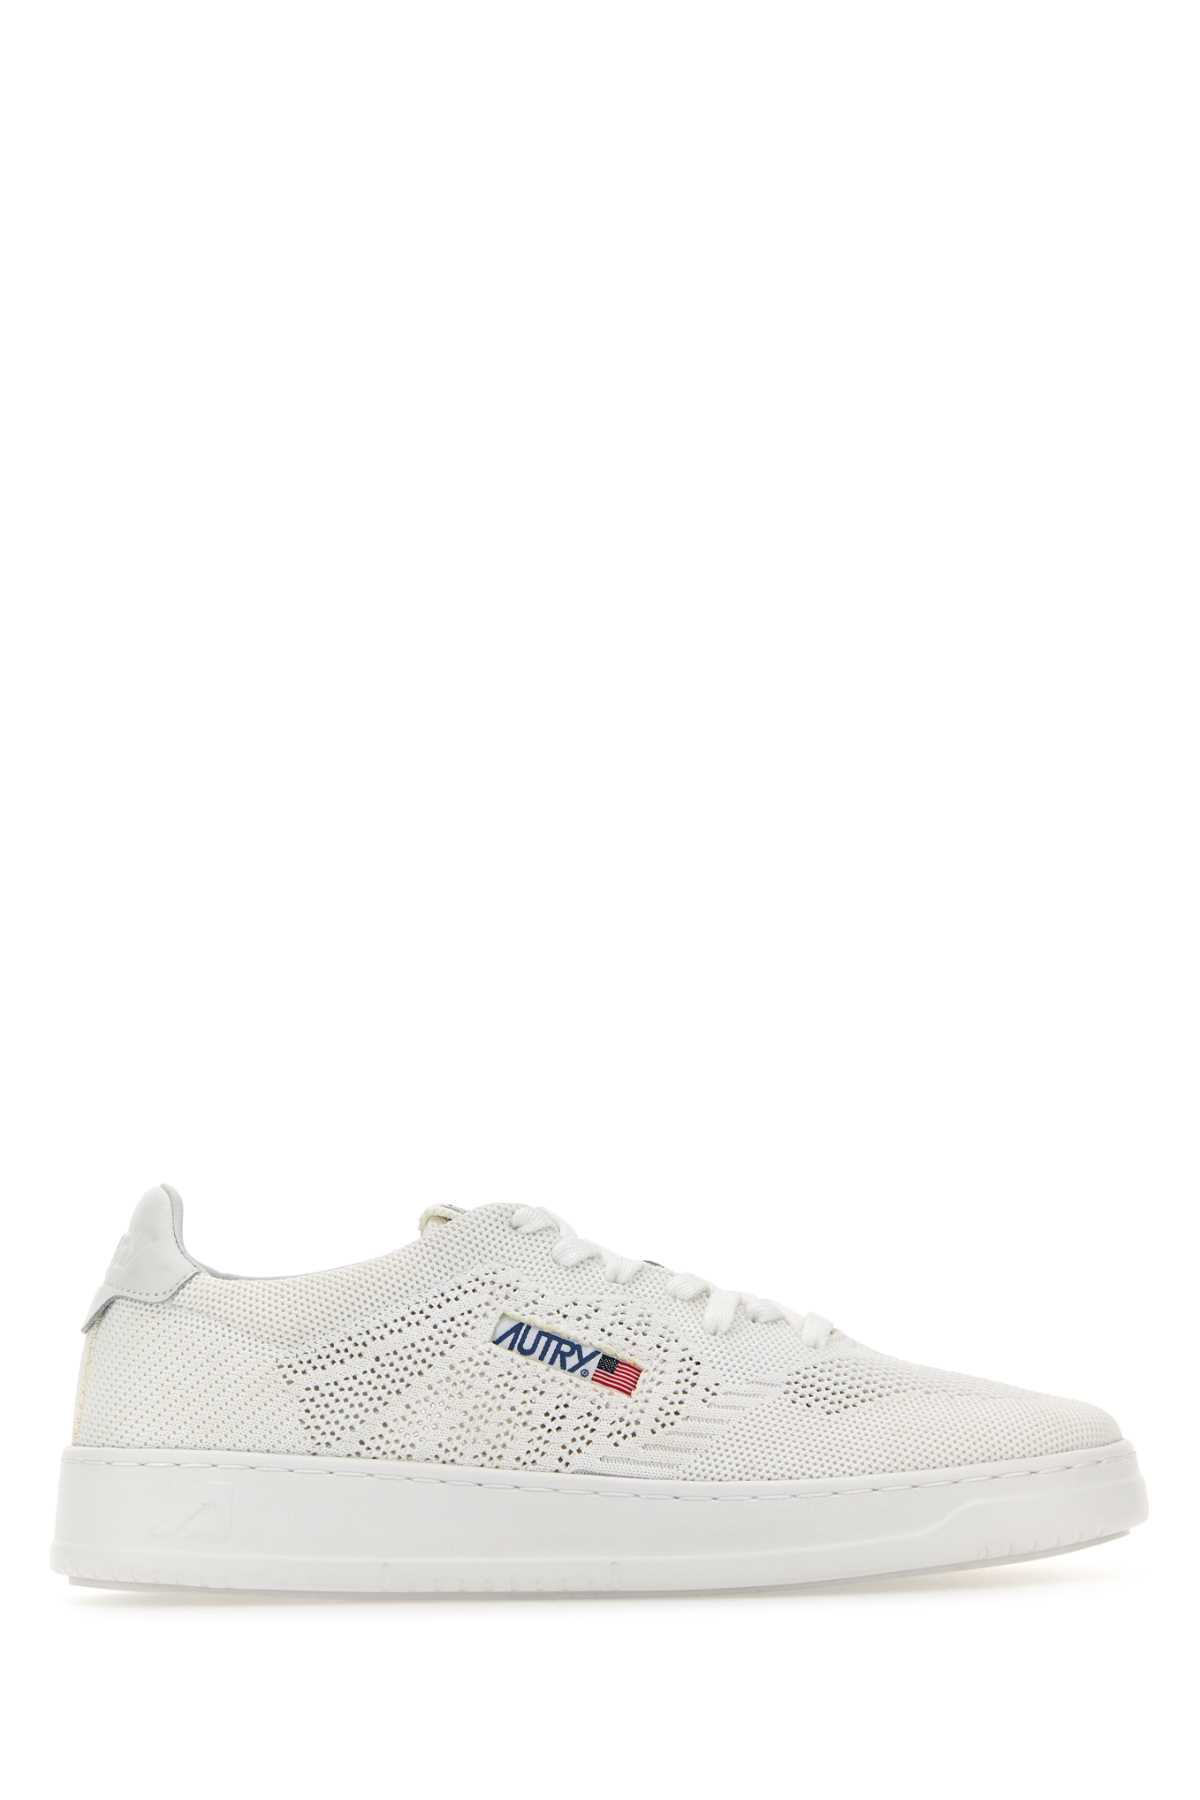 Shop Autry White Fabric Easeknit Sneakers